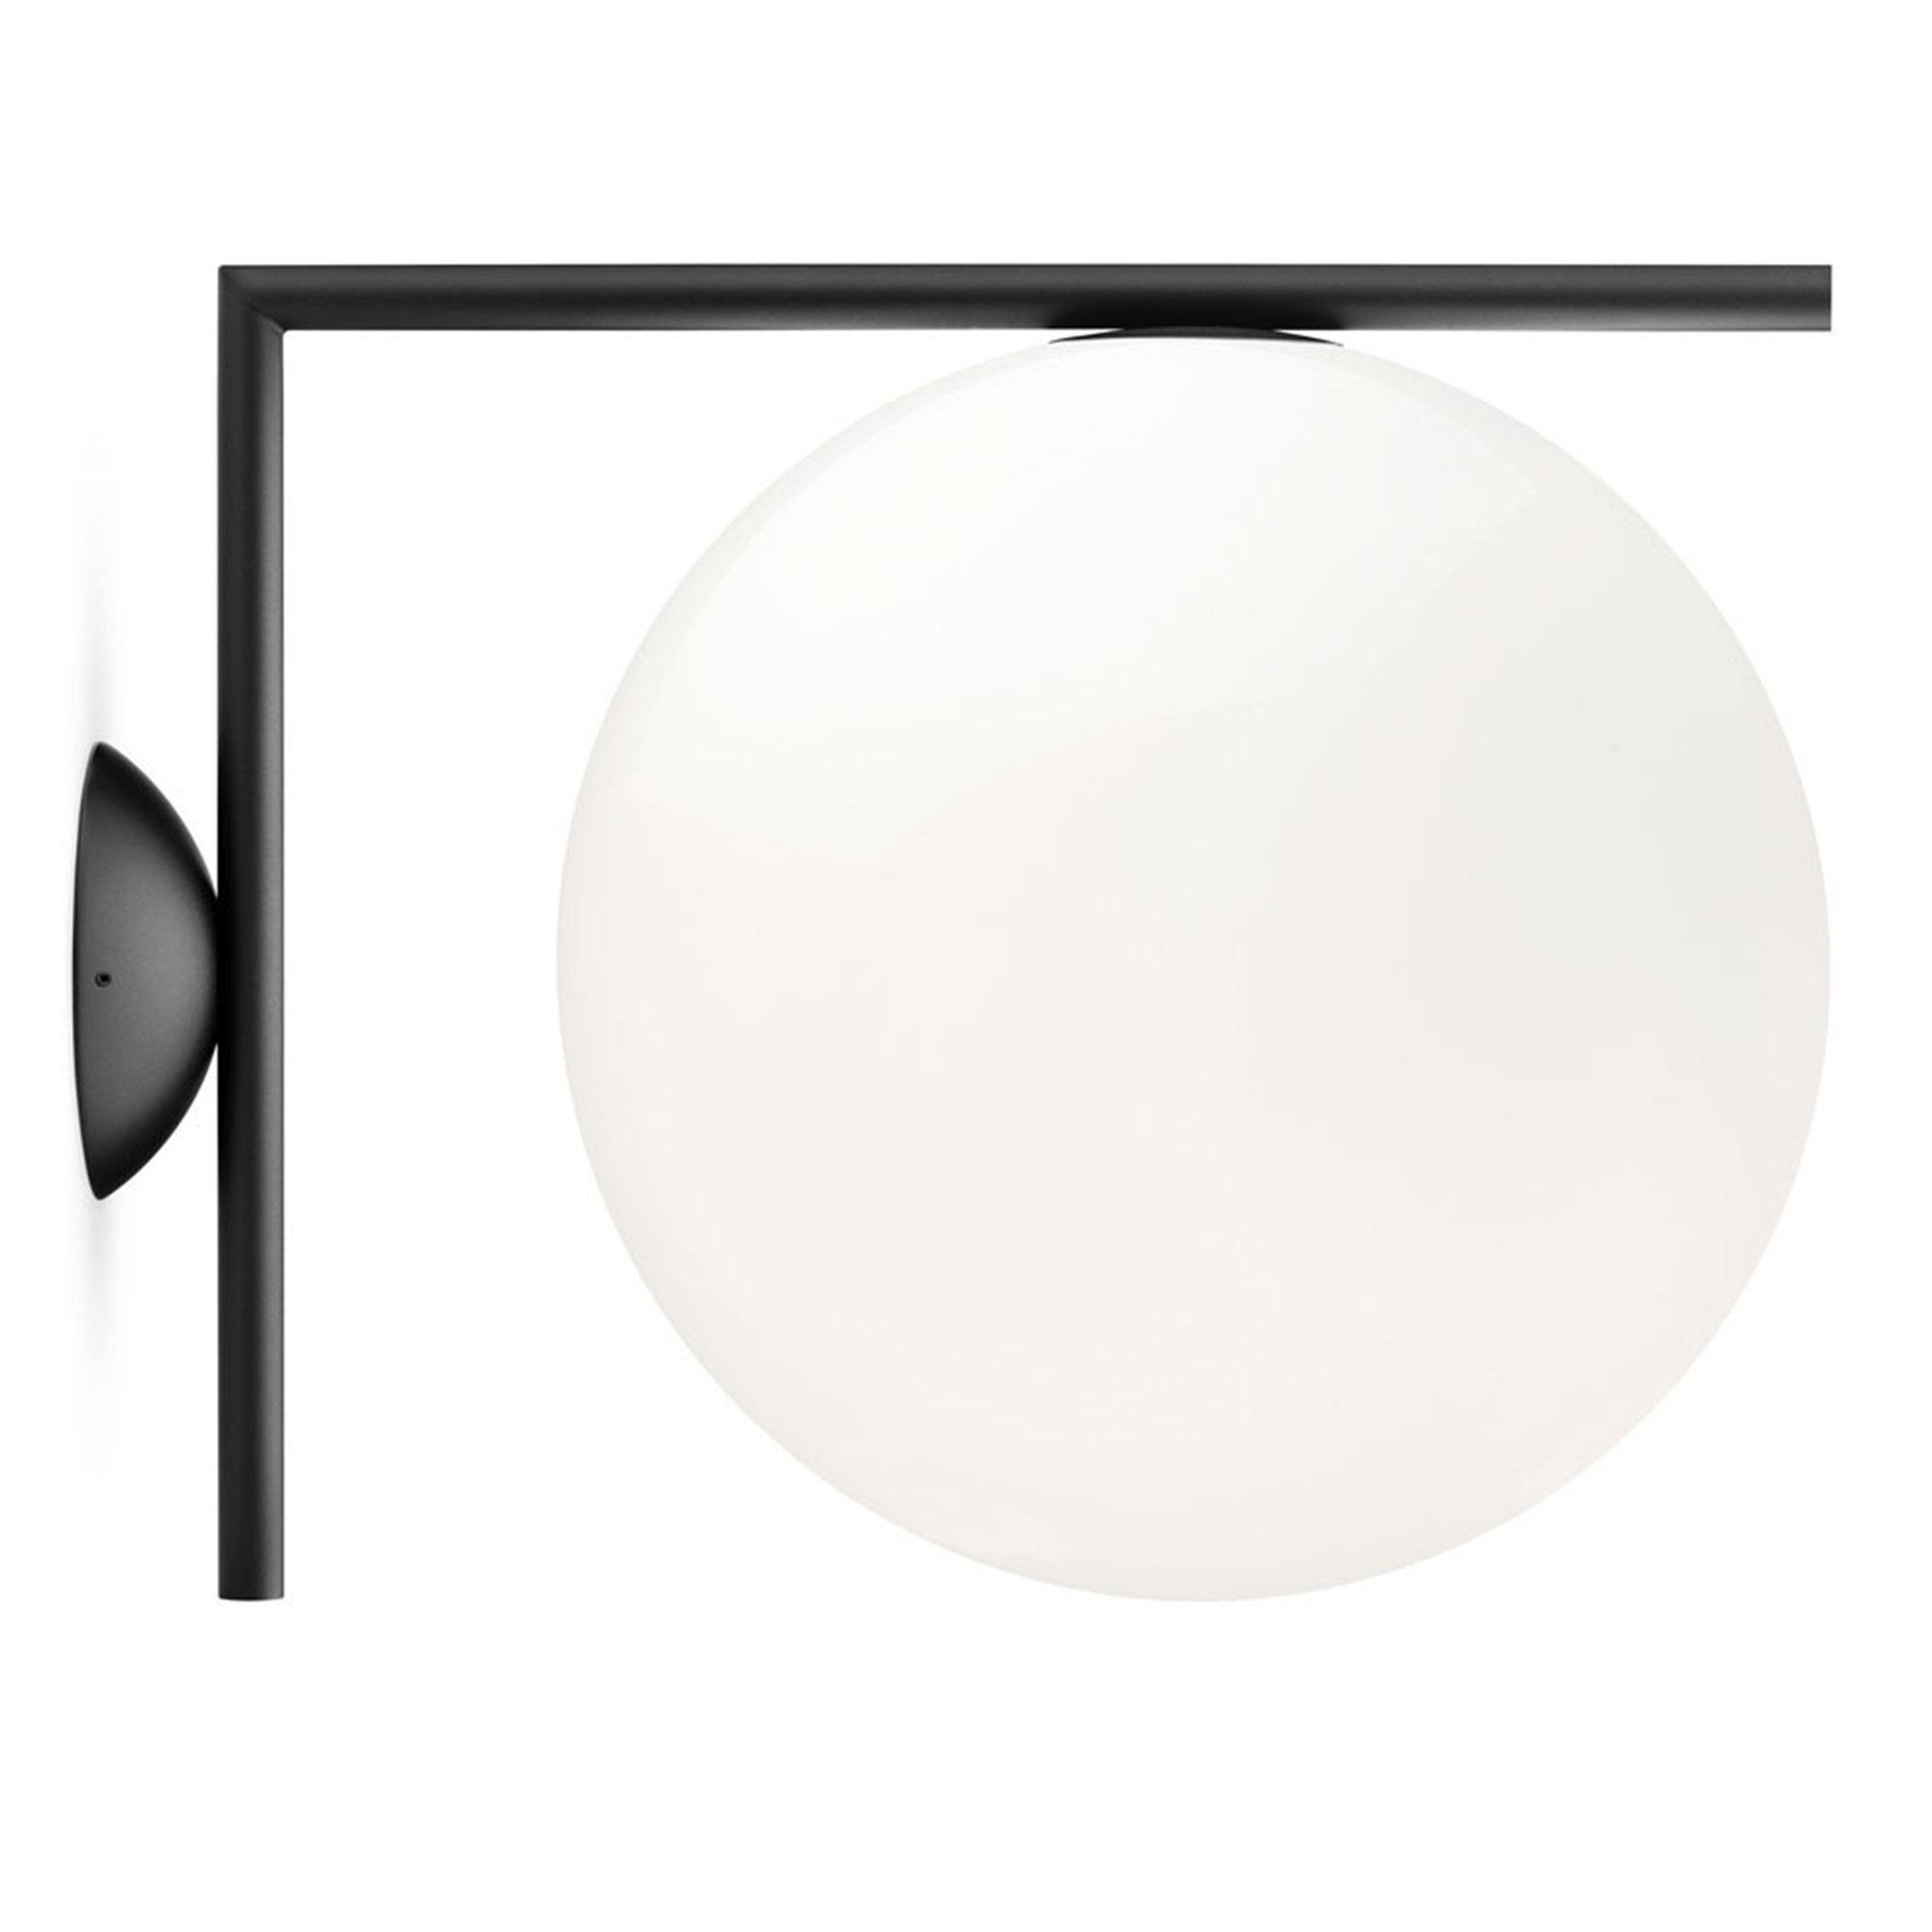 IC C/W 2 Outdoor by Michael Anastassiades for Flos